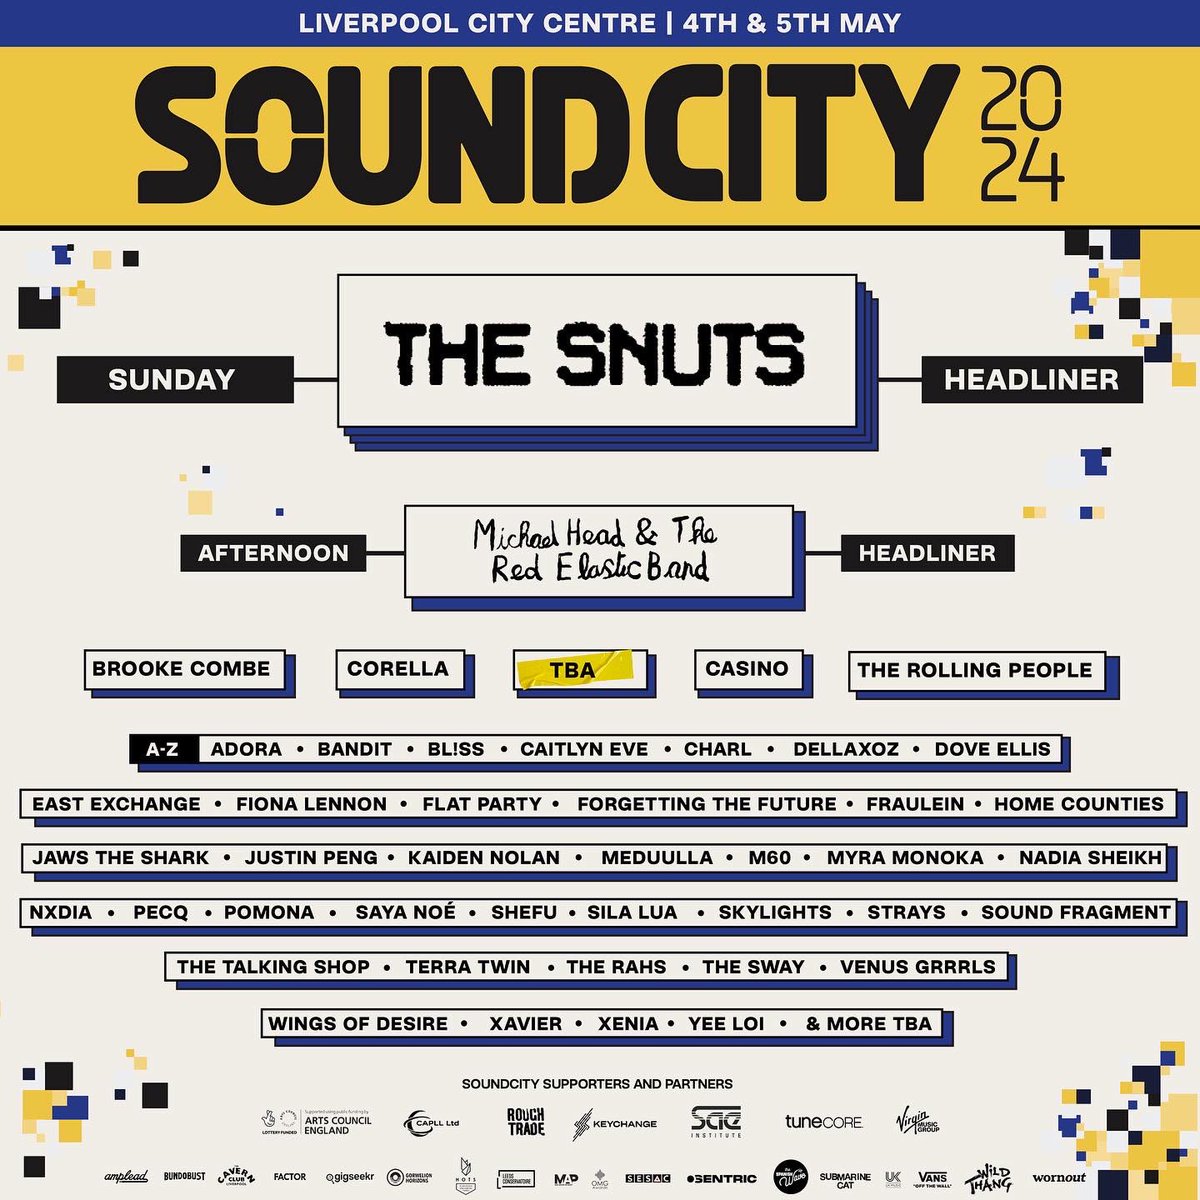 Excited to announce we are playing @SoundCity This year, alongside some amazing acts❤️